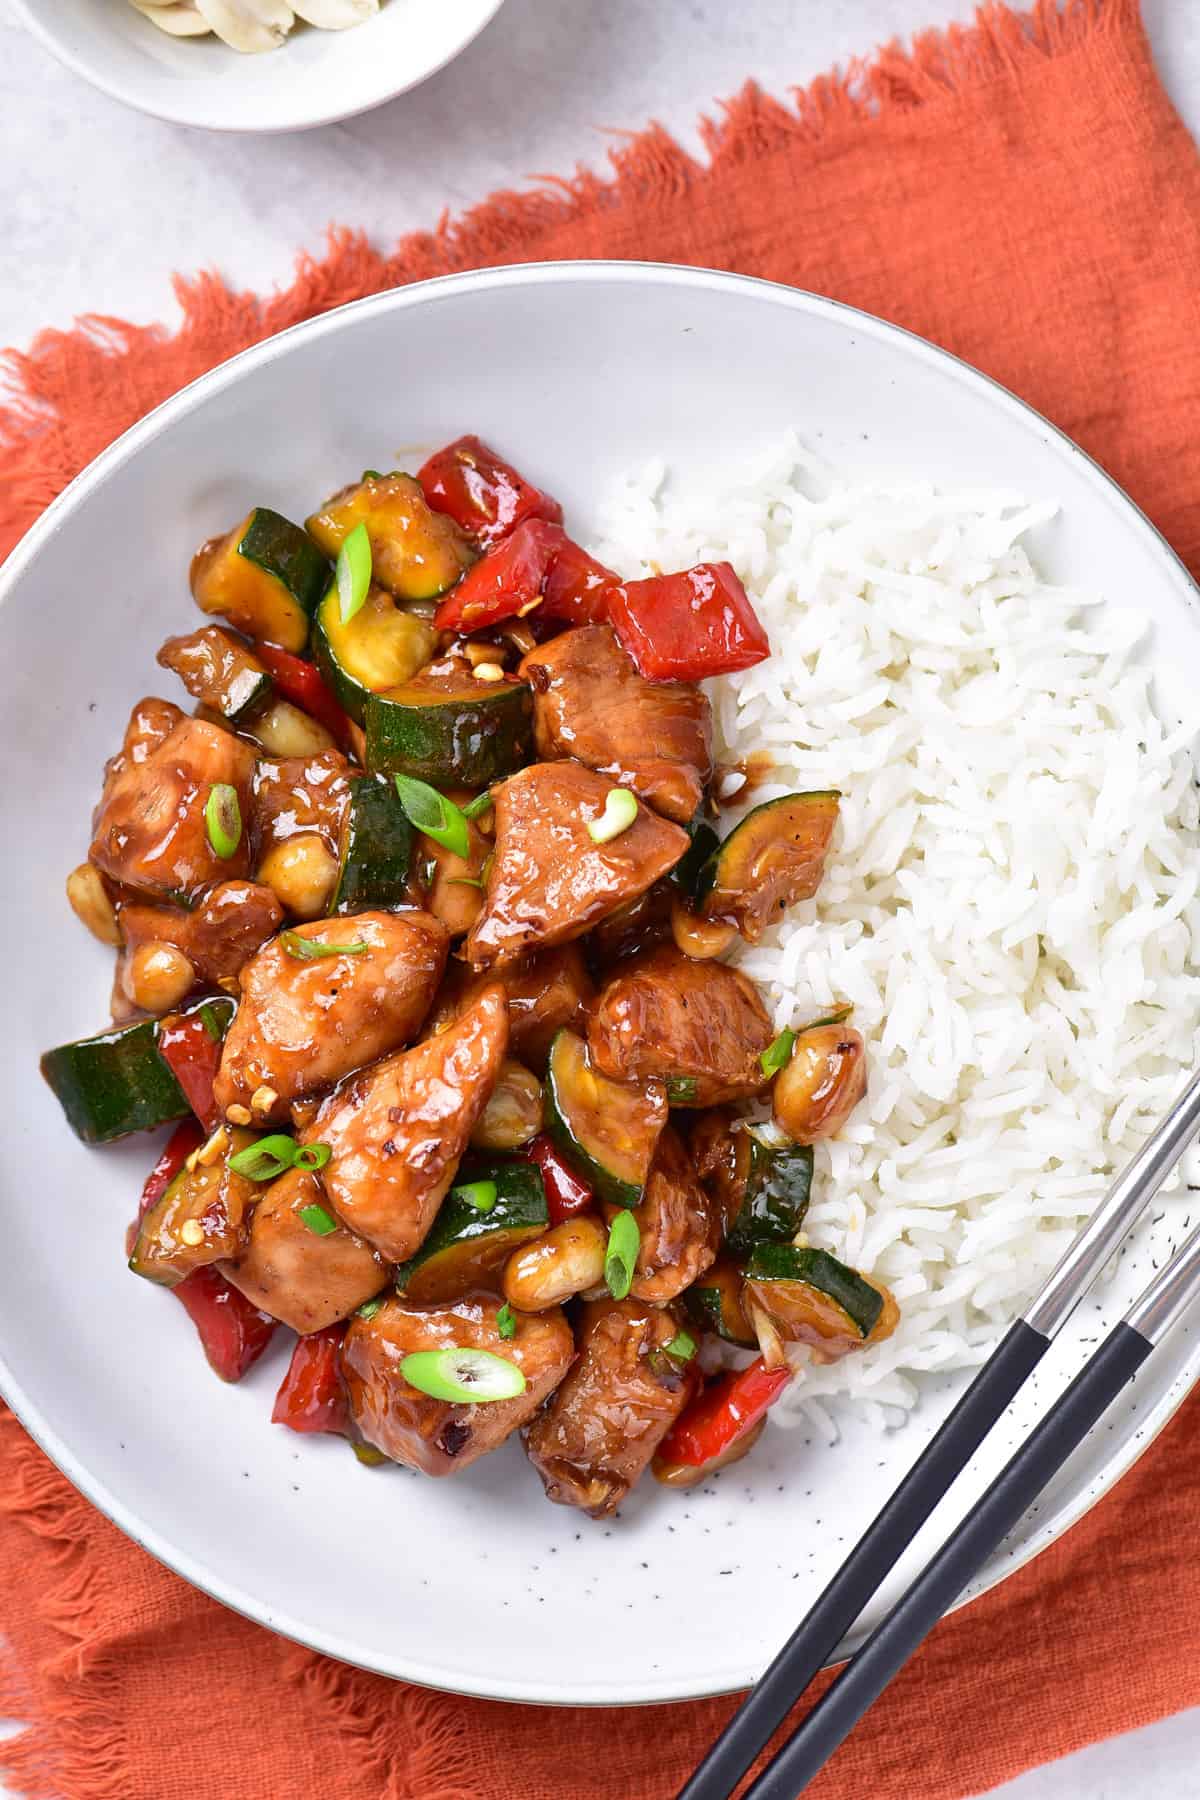 Table with a plate of Kung Pao Chicken over rice.